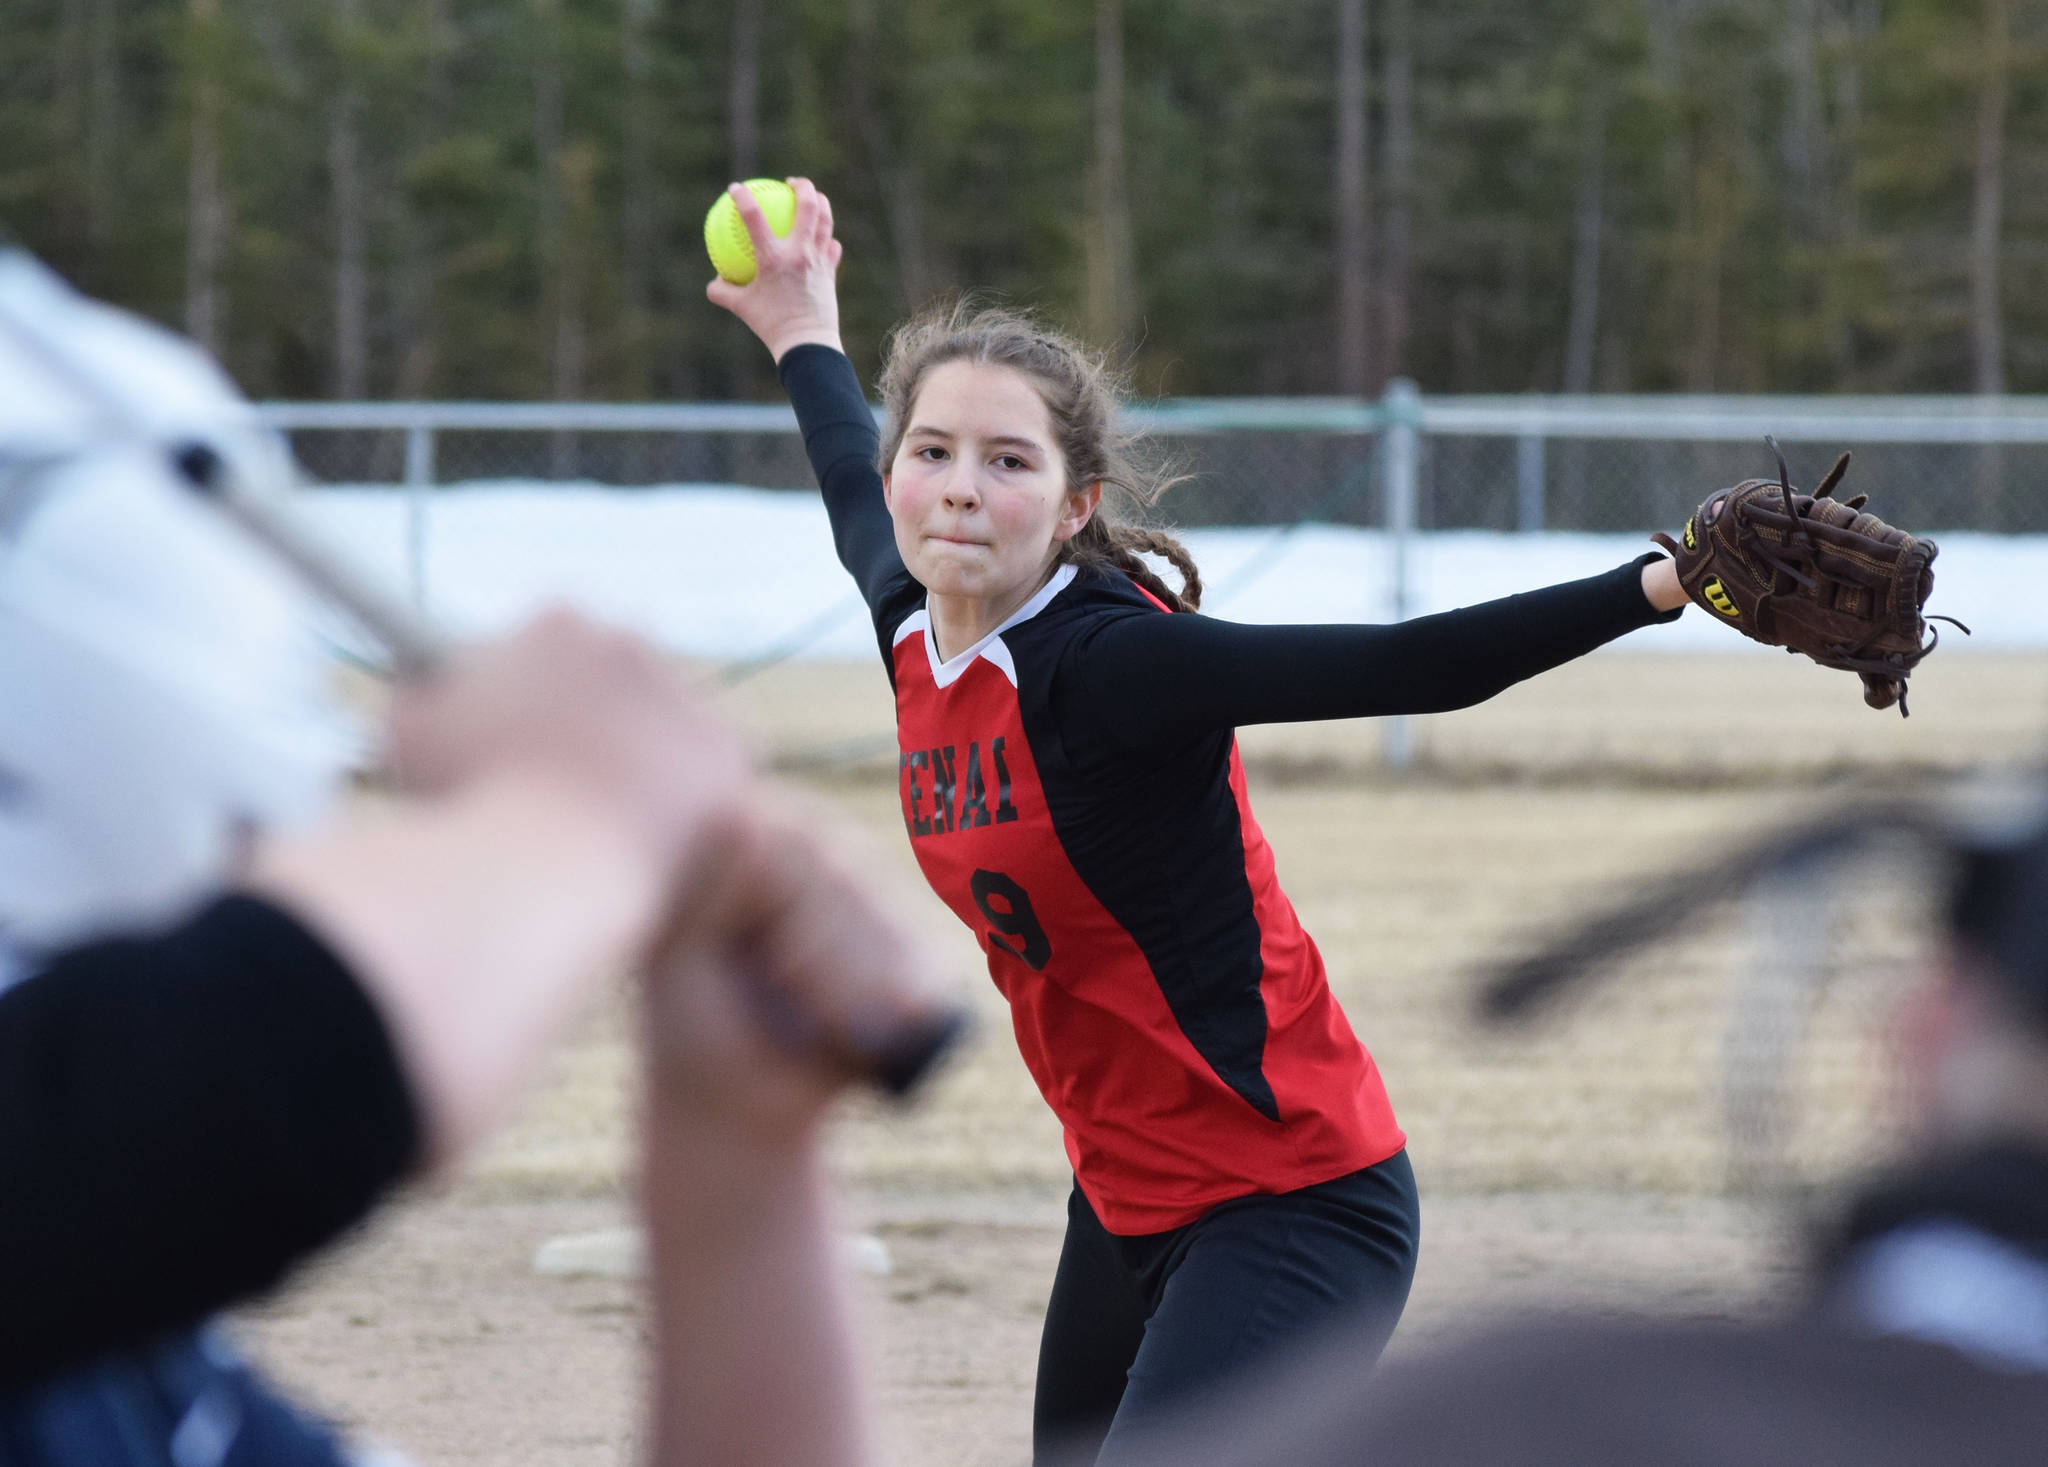 Kenai Central’s Lexi Reis unleashes a pitch on a Soldotna batter Thursday, April 25, 2019, at the Soldotna Softball Fields. (Photo by Joey Klecka/Peninsula Clarion)